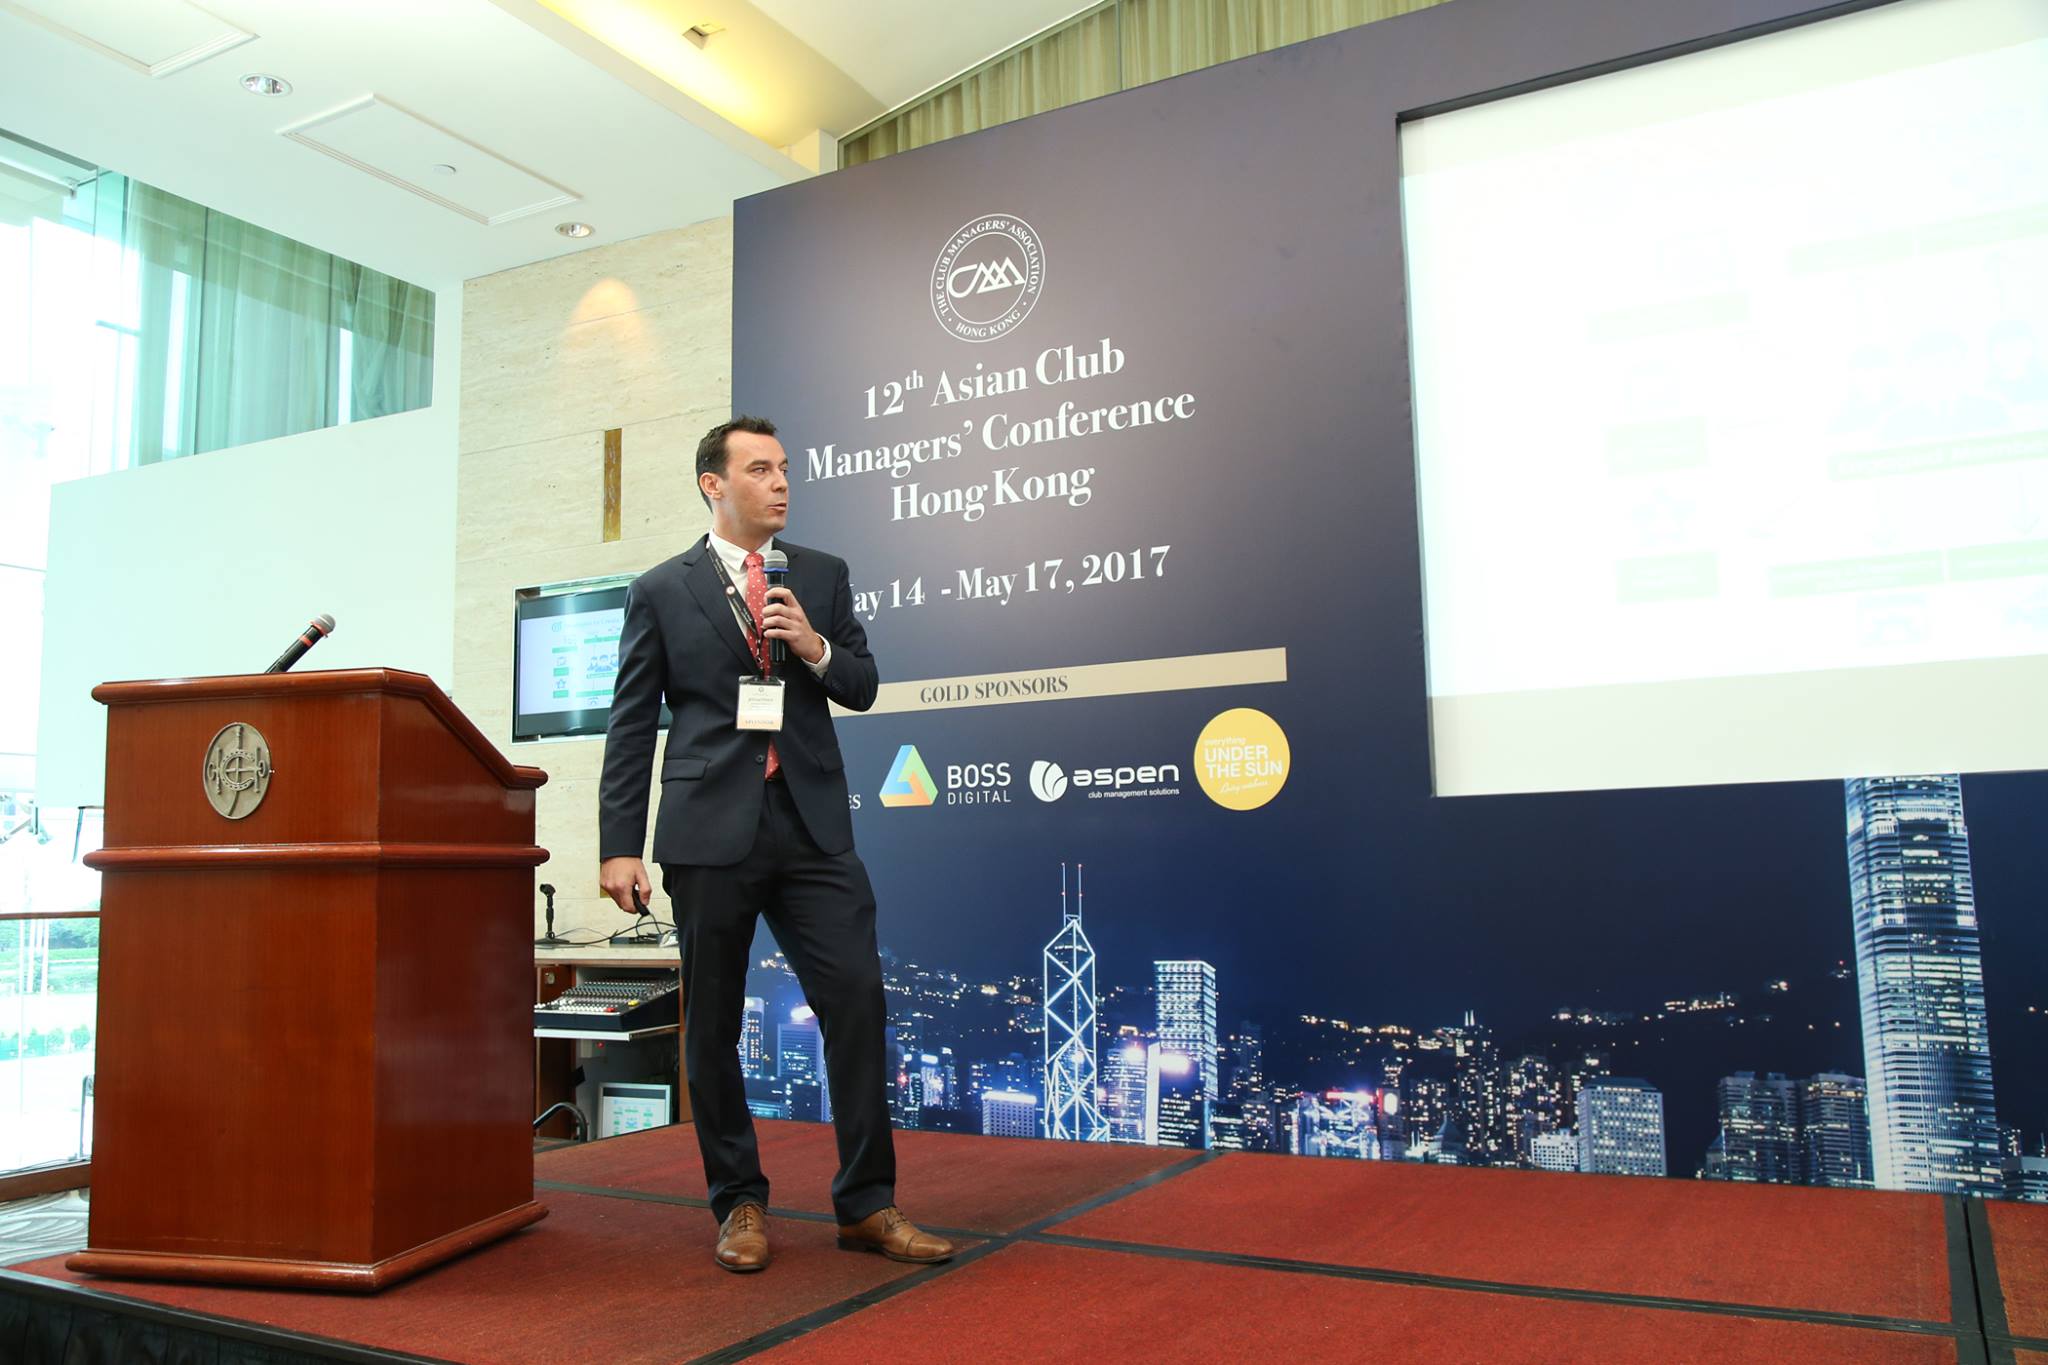 12th Asian Club Managers' Conference in Hong Kong Boss Digital